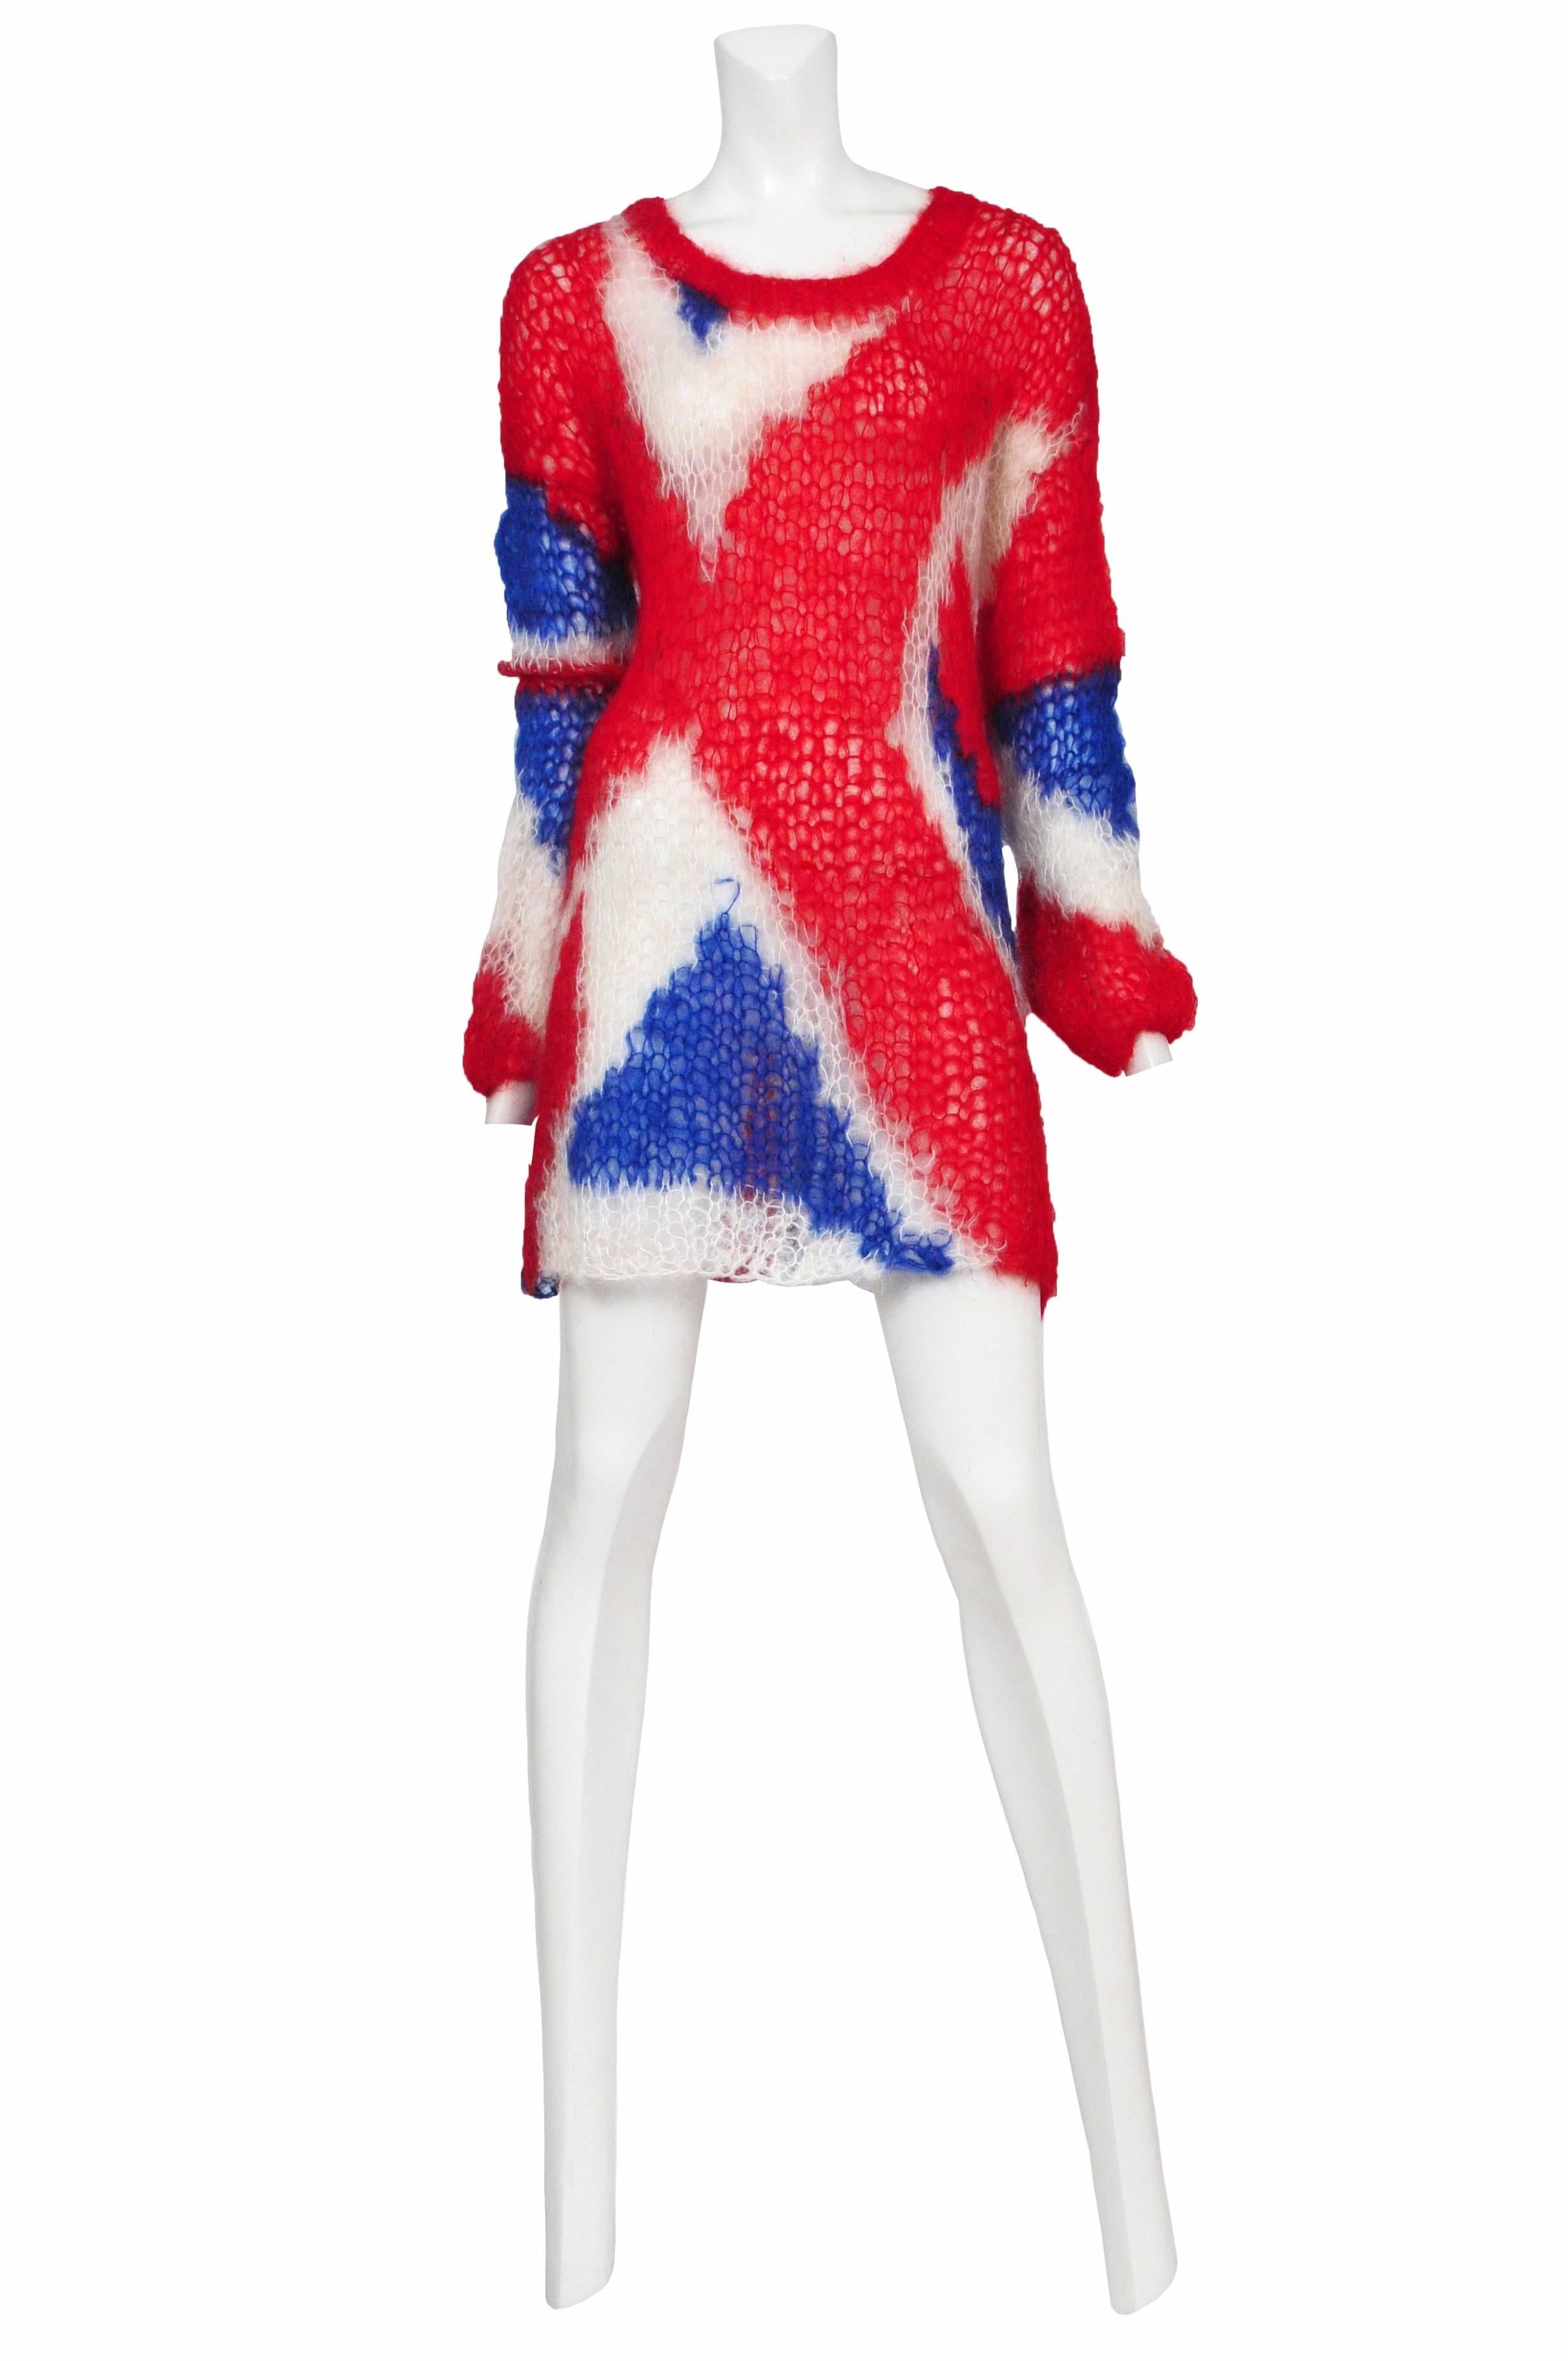 Red, white and blue Union Jack mohair sweater. Look #15. The Girl Who Lived In The Tree collection AW 2008. 

Please contact for additional information or photos.